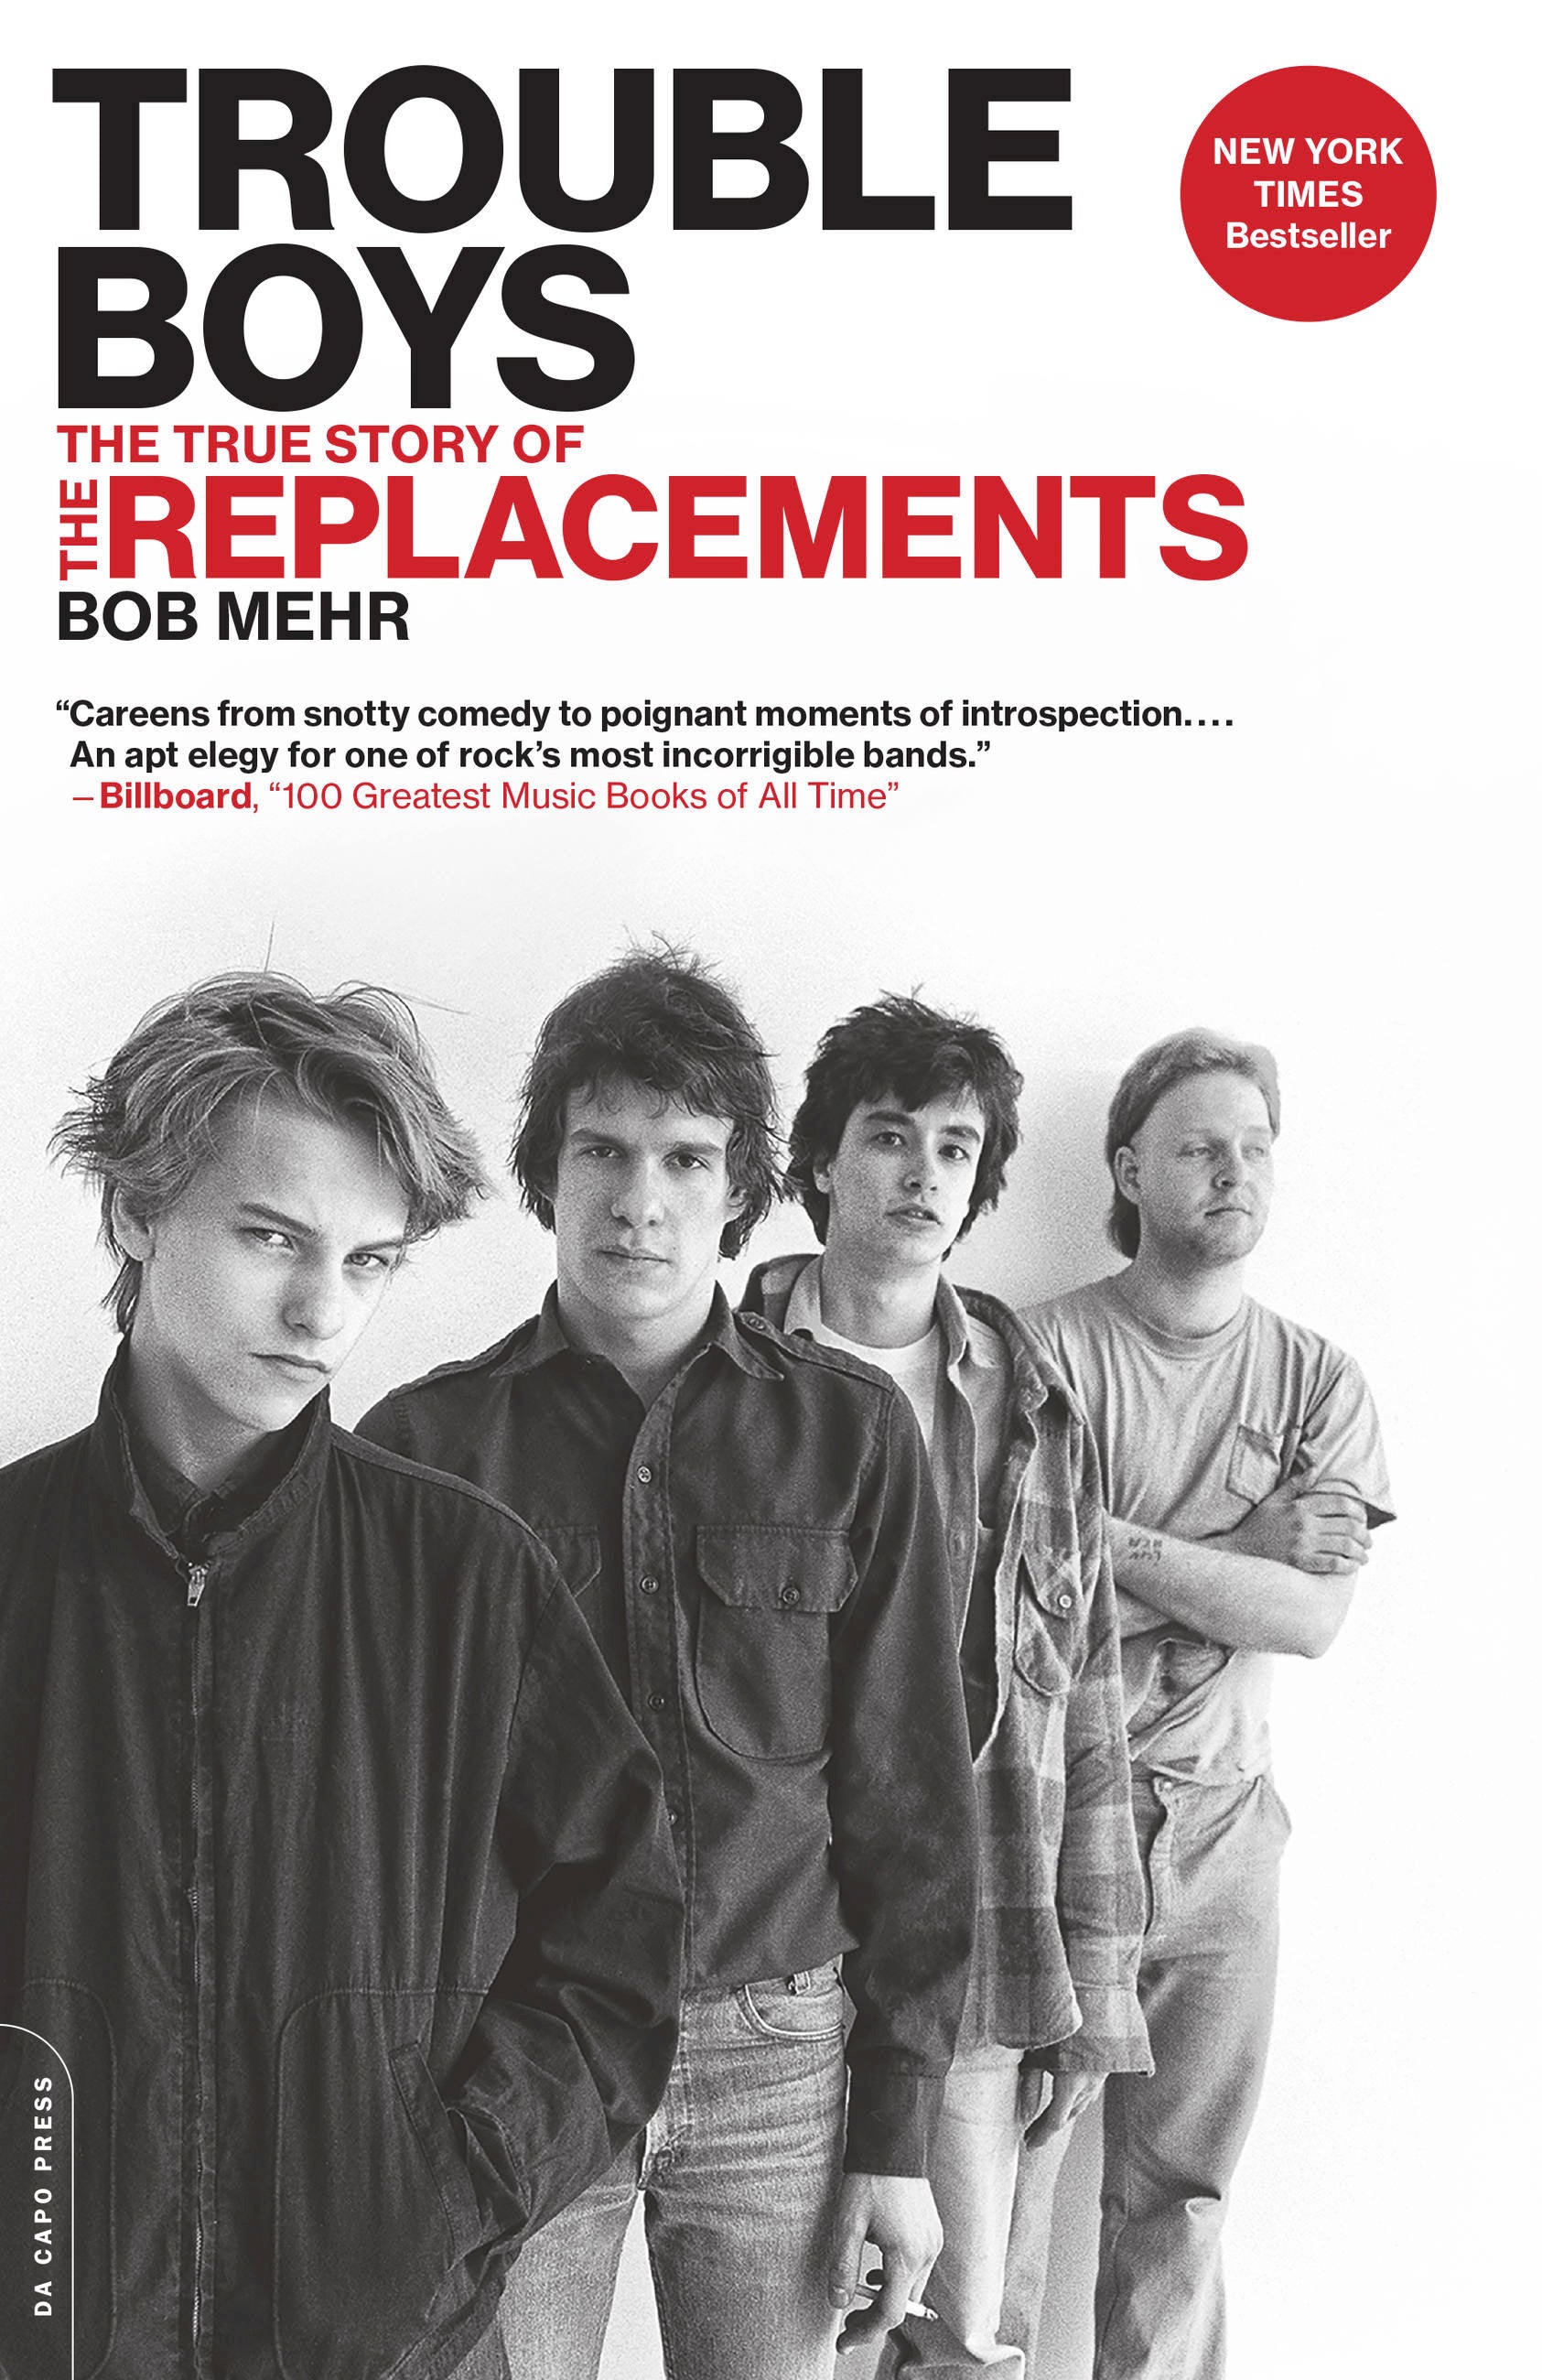 TROUBLE BOYS: THE TRUE STORY OF THE REPLACEMENTS BOOK